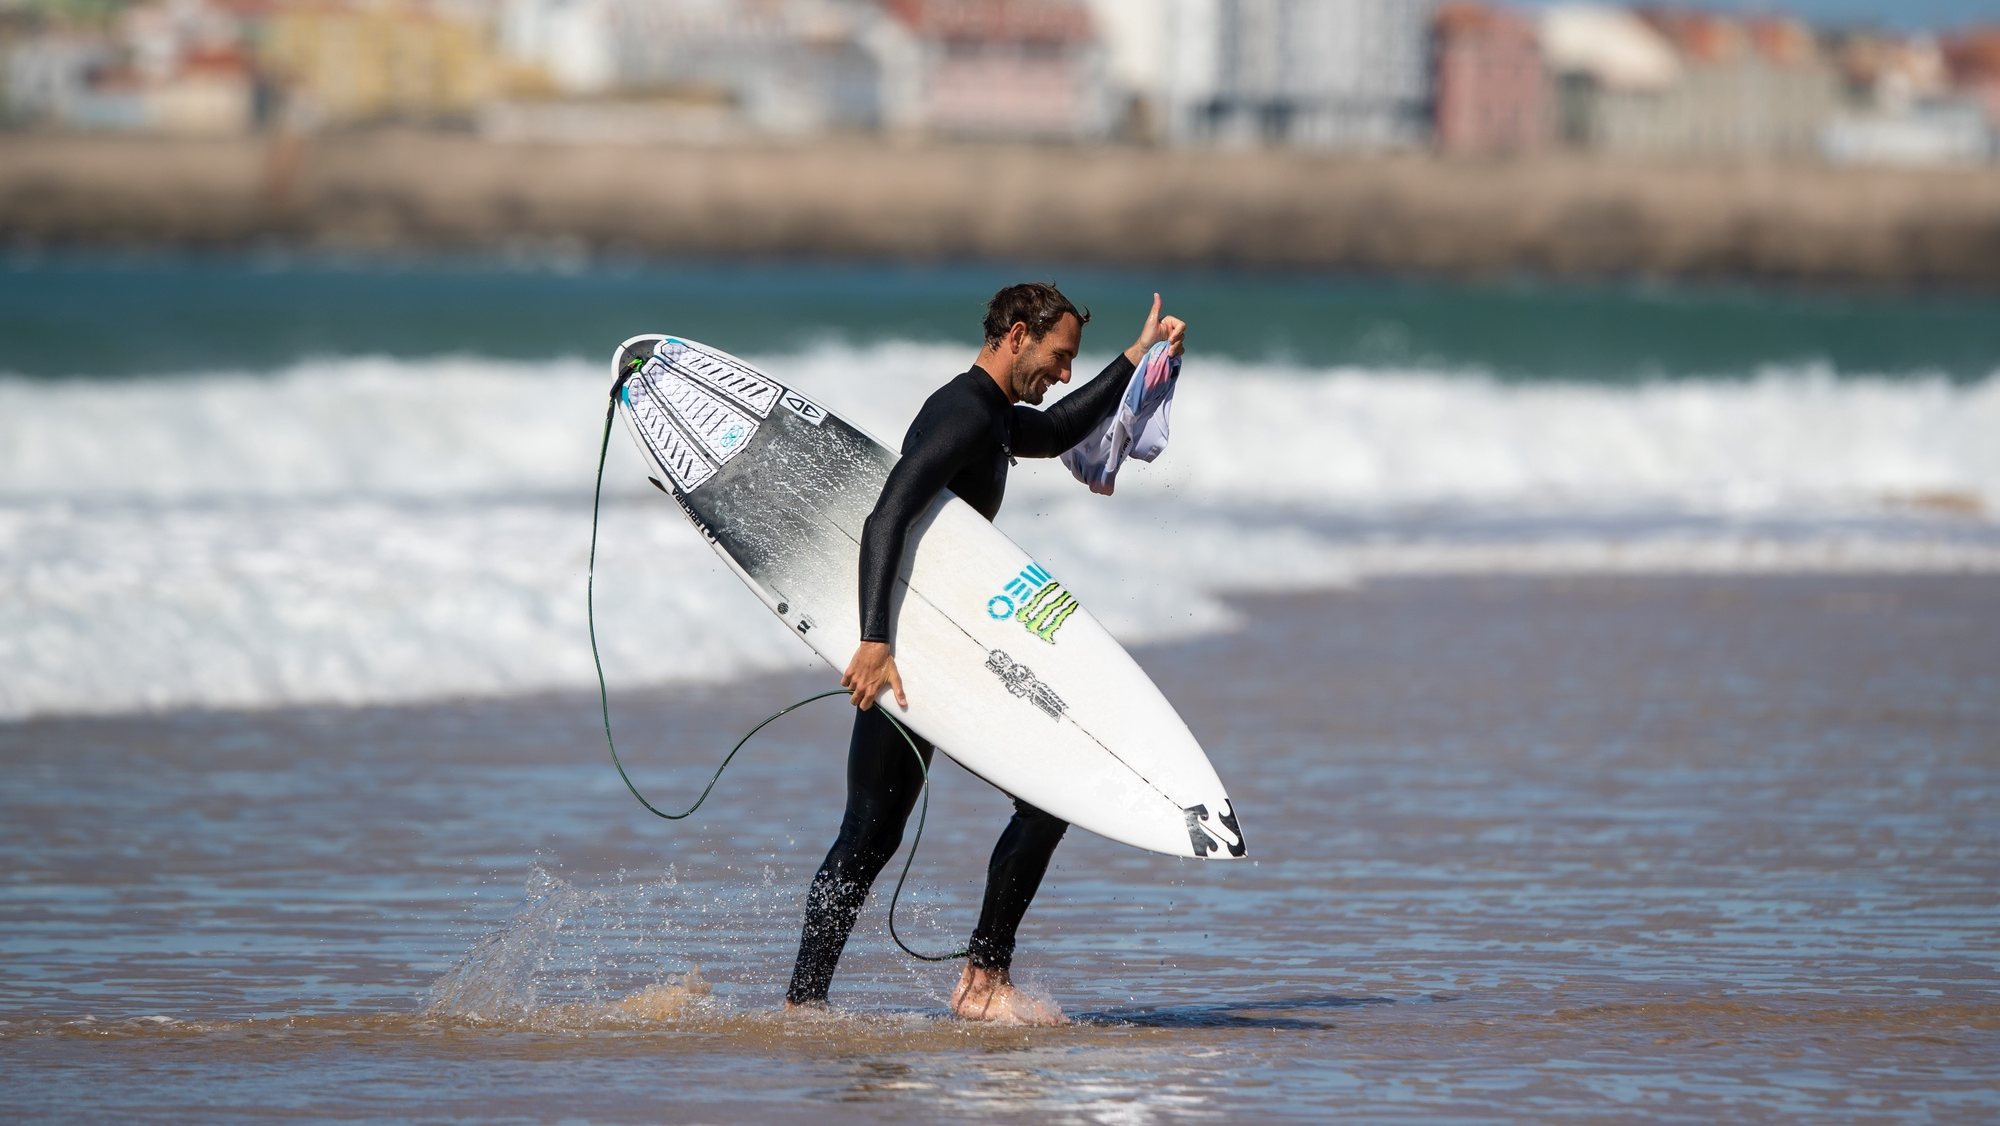 Portuguese surfer Frederico Morais acknowledges the crowd ater losing his round of 16 heat of the Meo Pro Portugal, the portuguese leg of the World Surf League World Tour, at Supertubos beach, in Peniche, Portugal, 06 March 2022. JOSE SENA GOULAO/LUSA